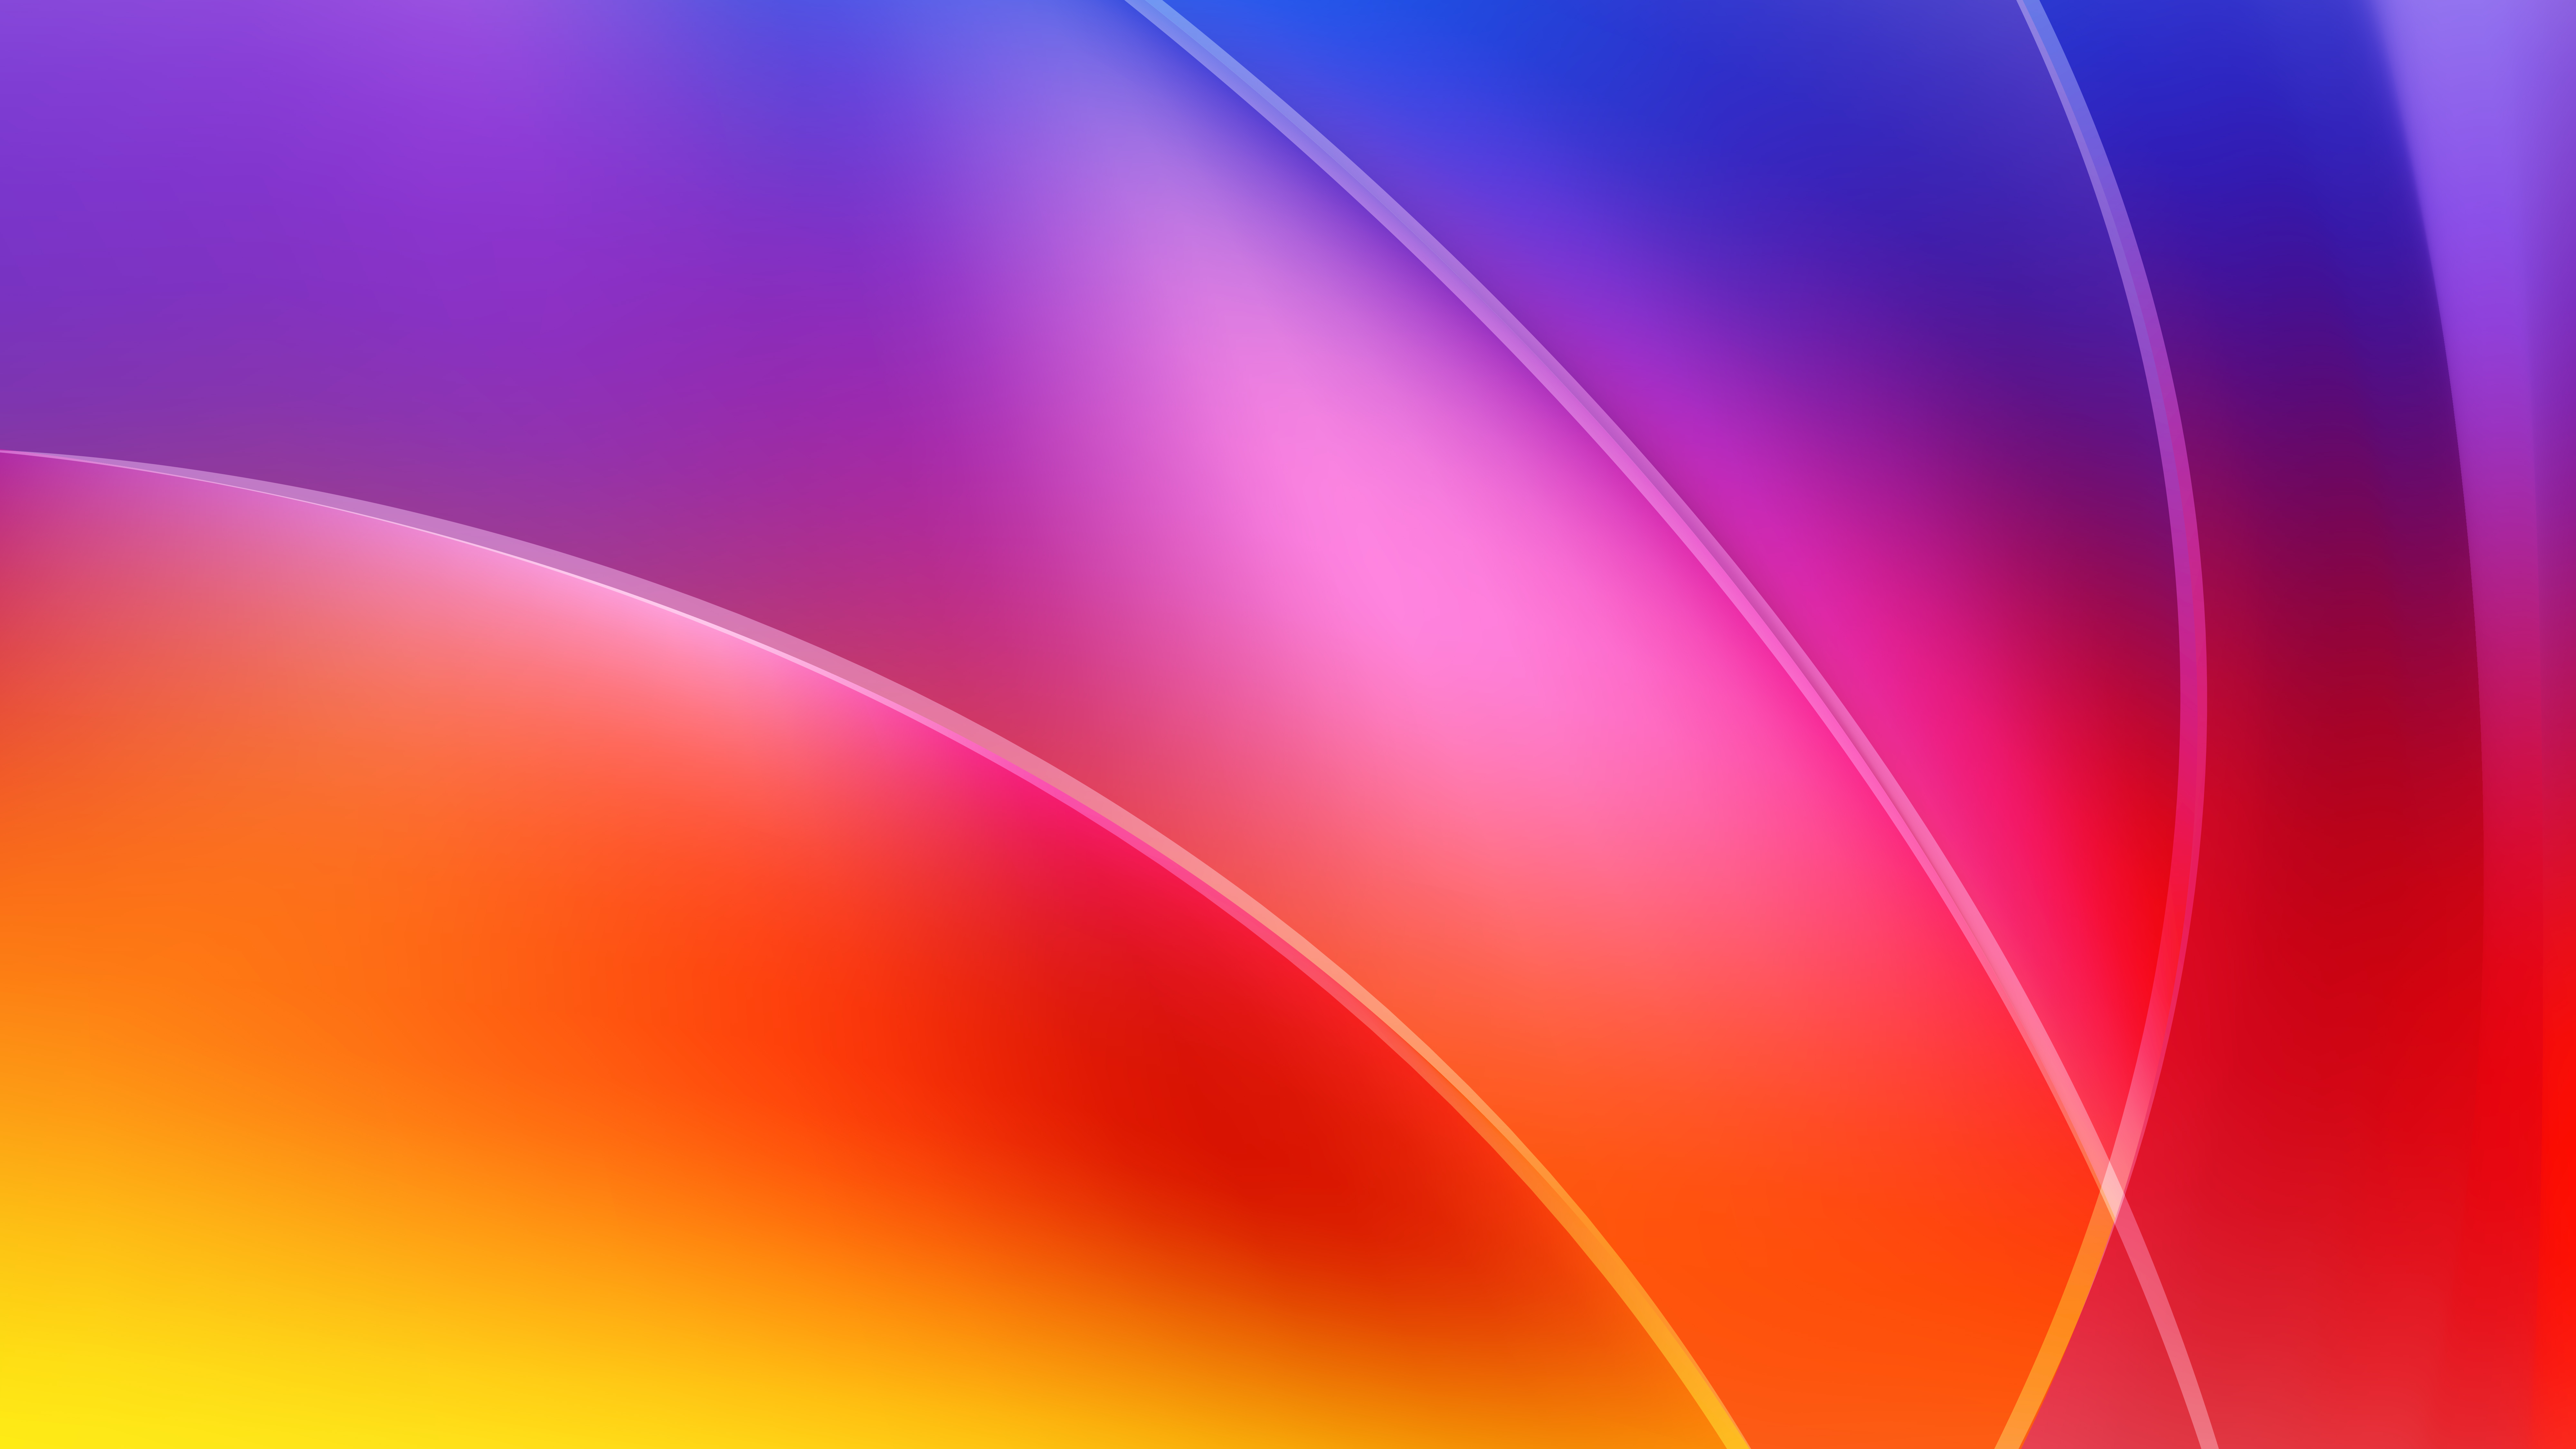 Free Abstract Red Yellow And Blue Graphic Background